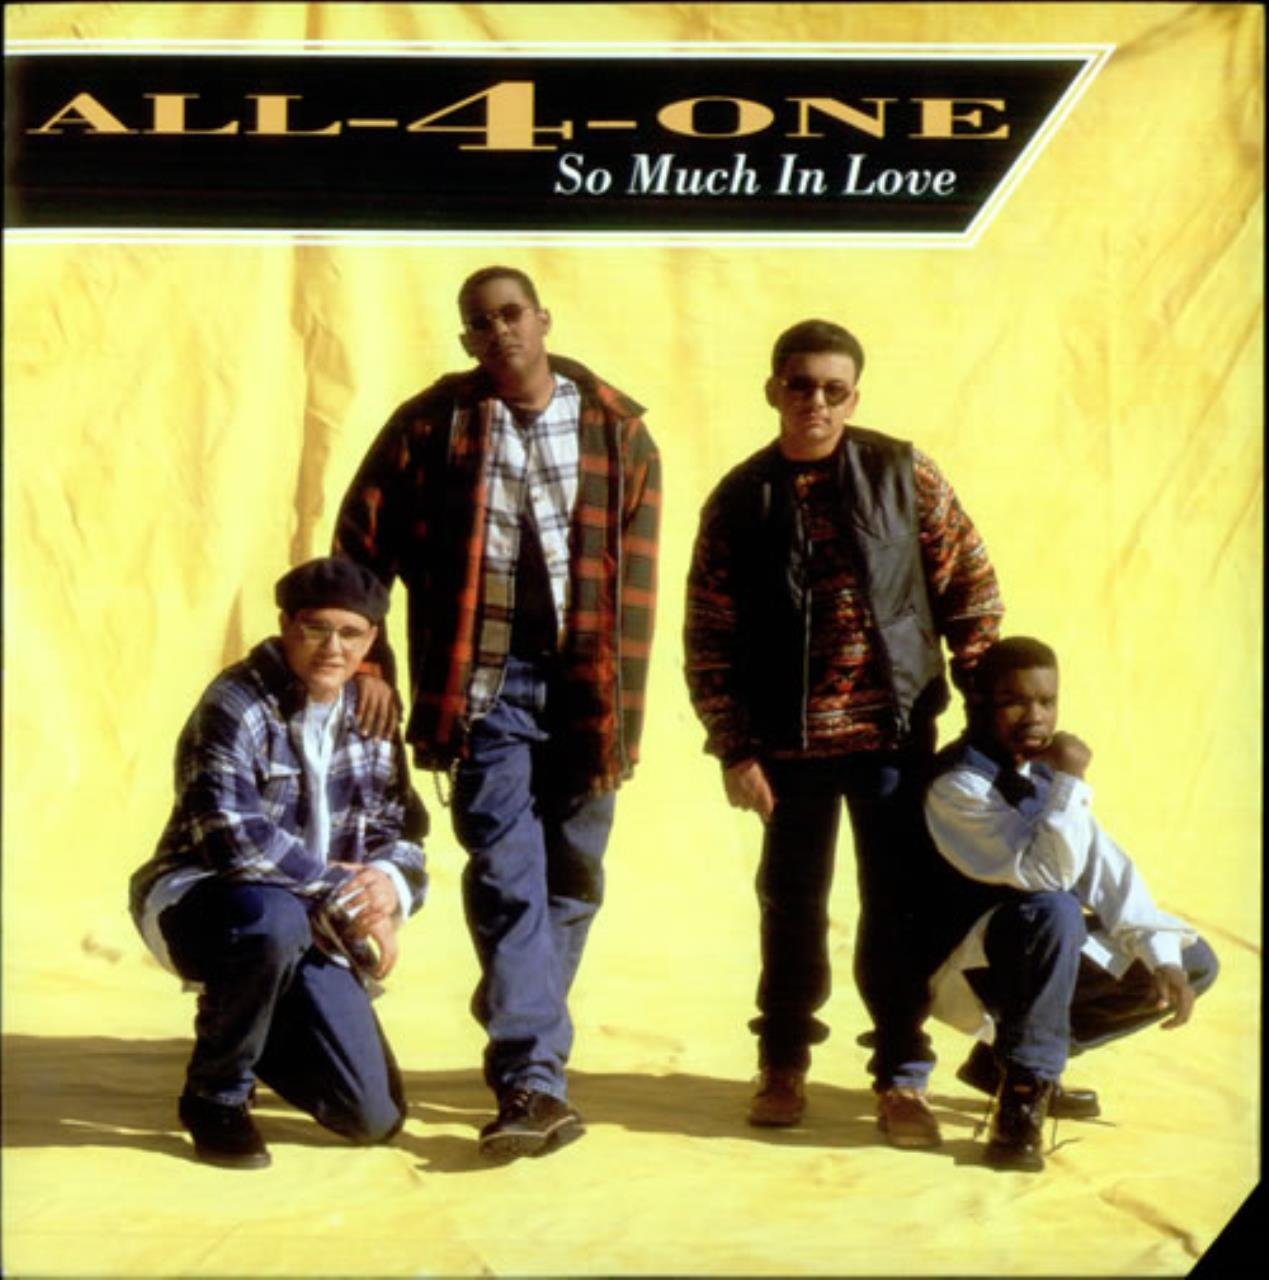 All-4-One - So Much In Love mp3 download